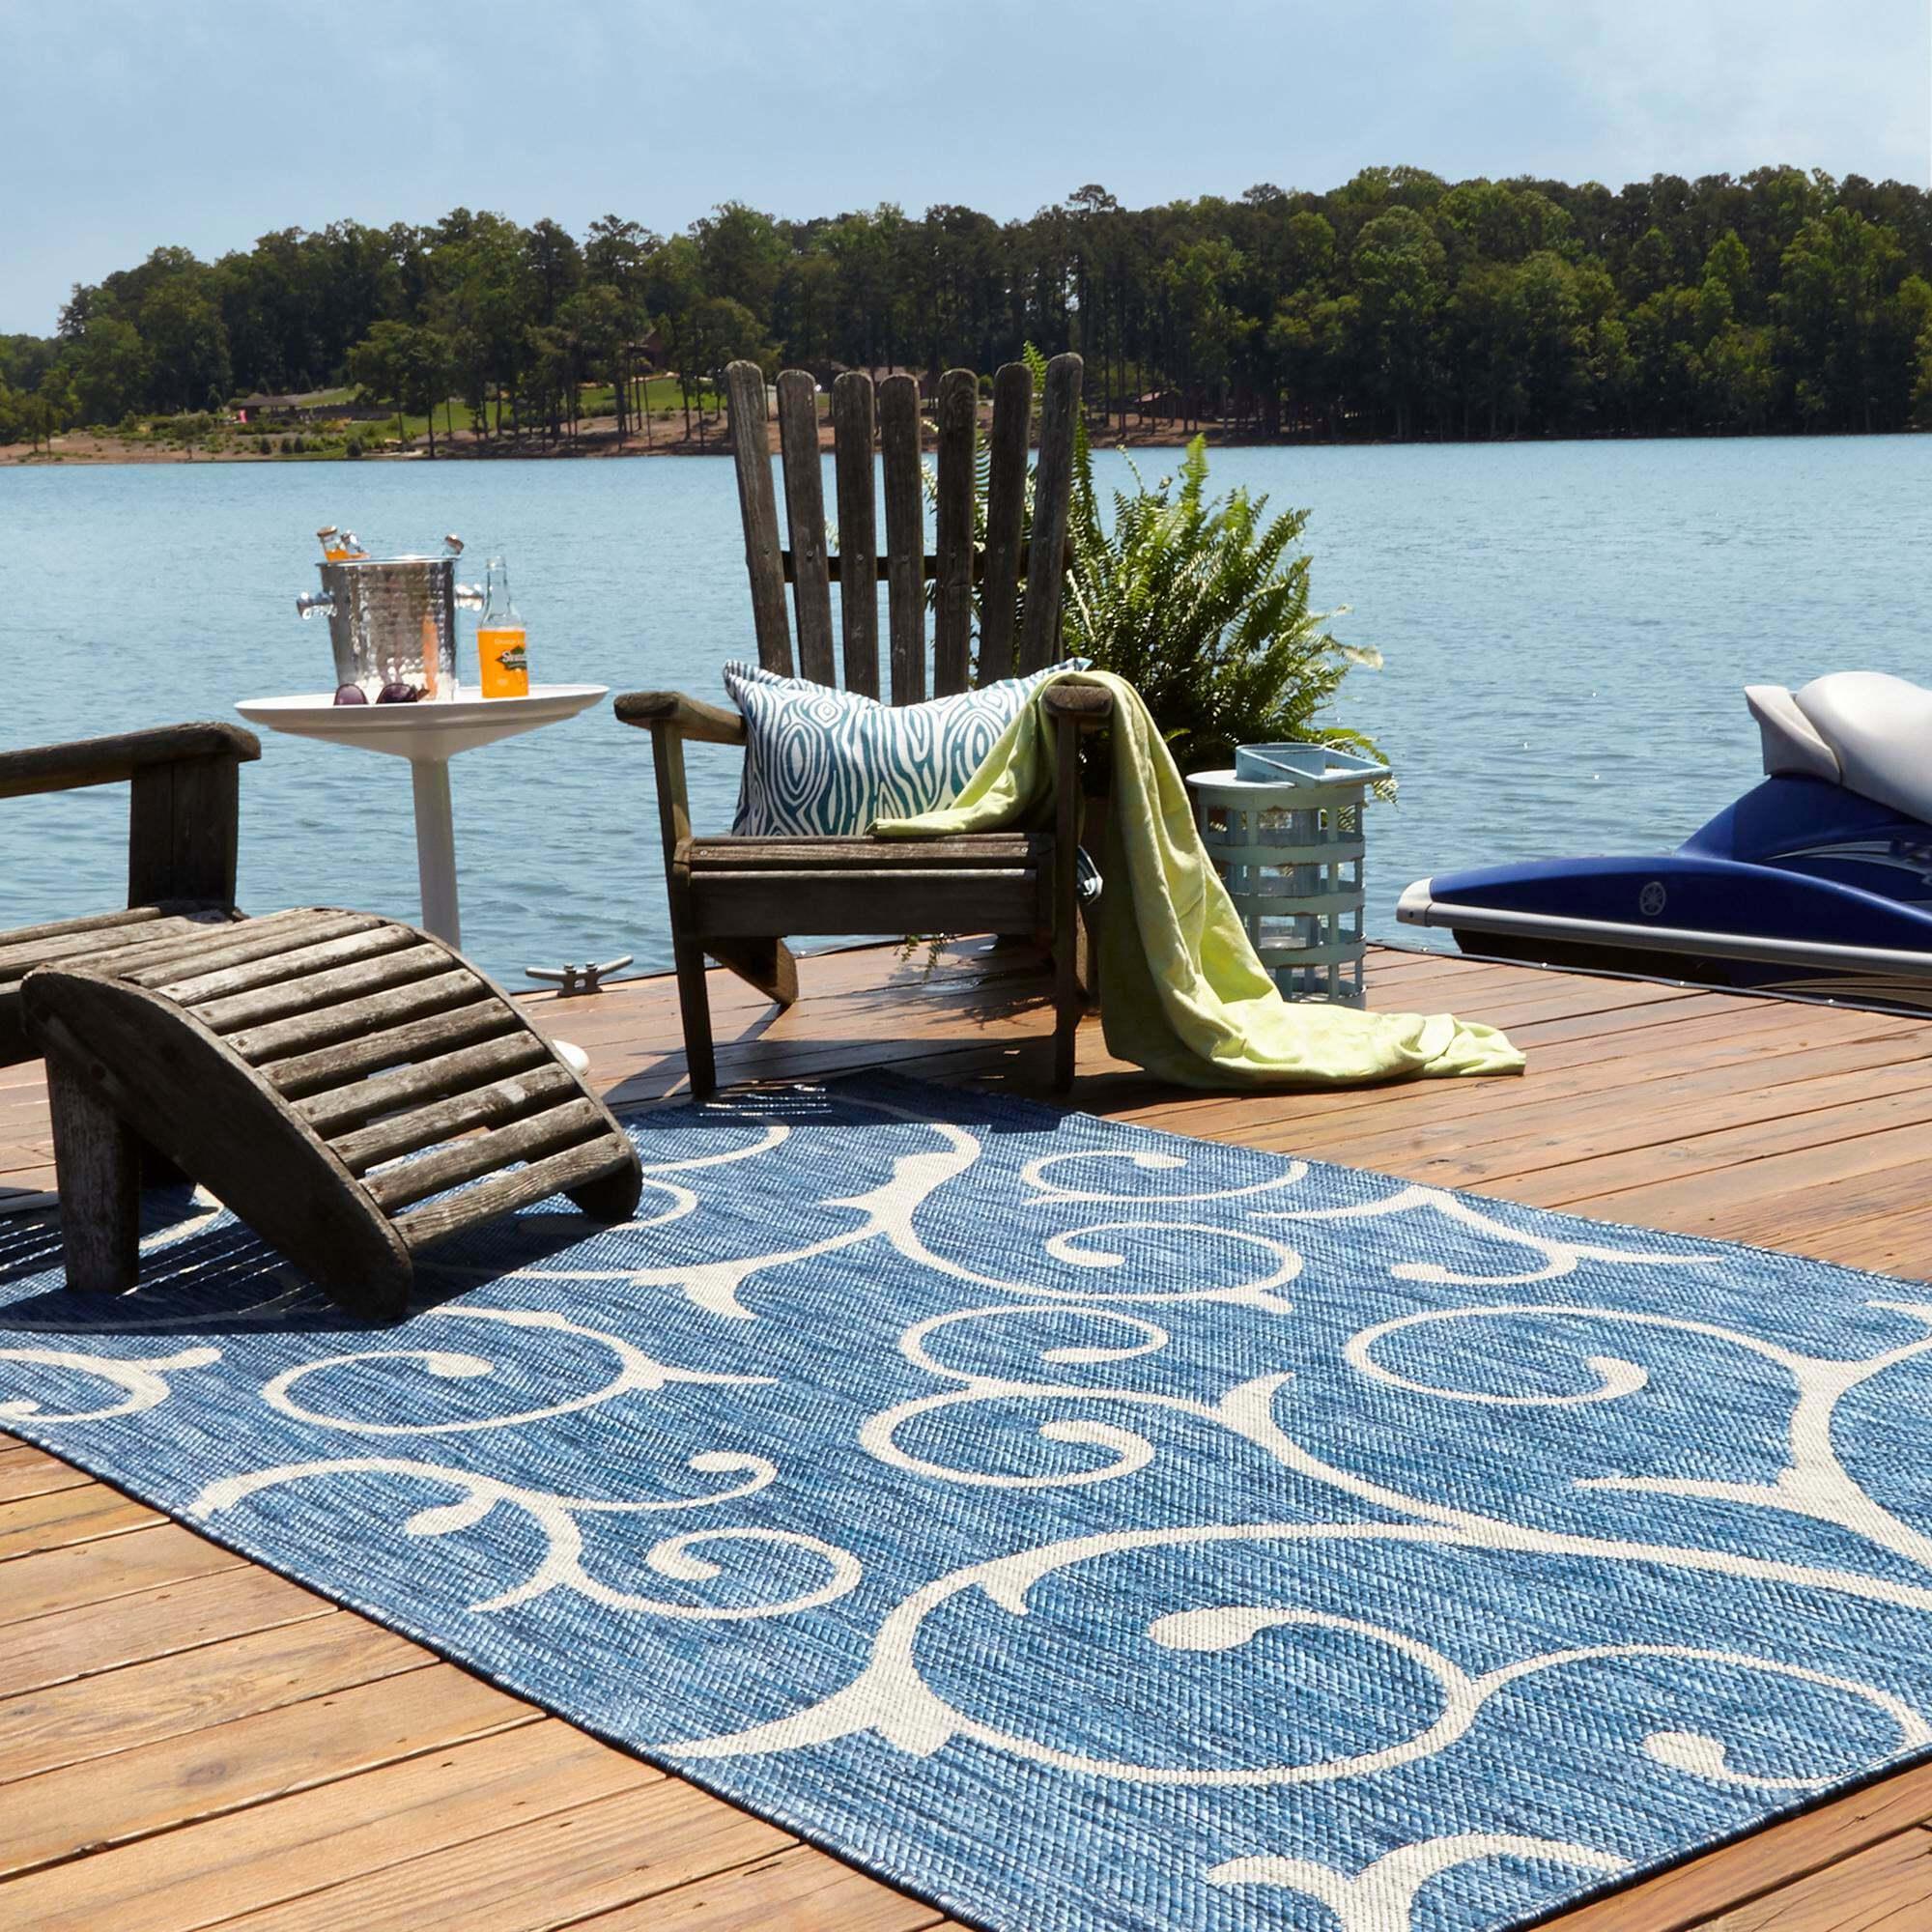 Unique Loom Outdoor Rugs - Outdoor Botanical Damask Rectangular 9x12 Rug Blue & Gray